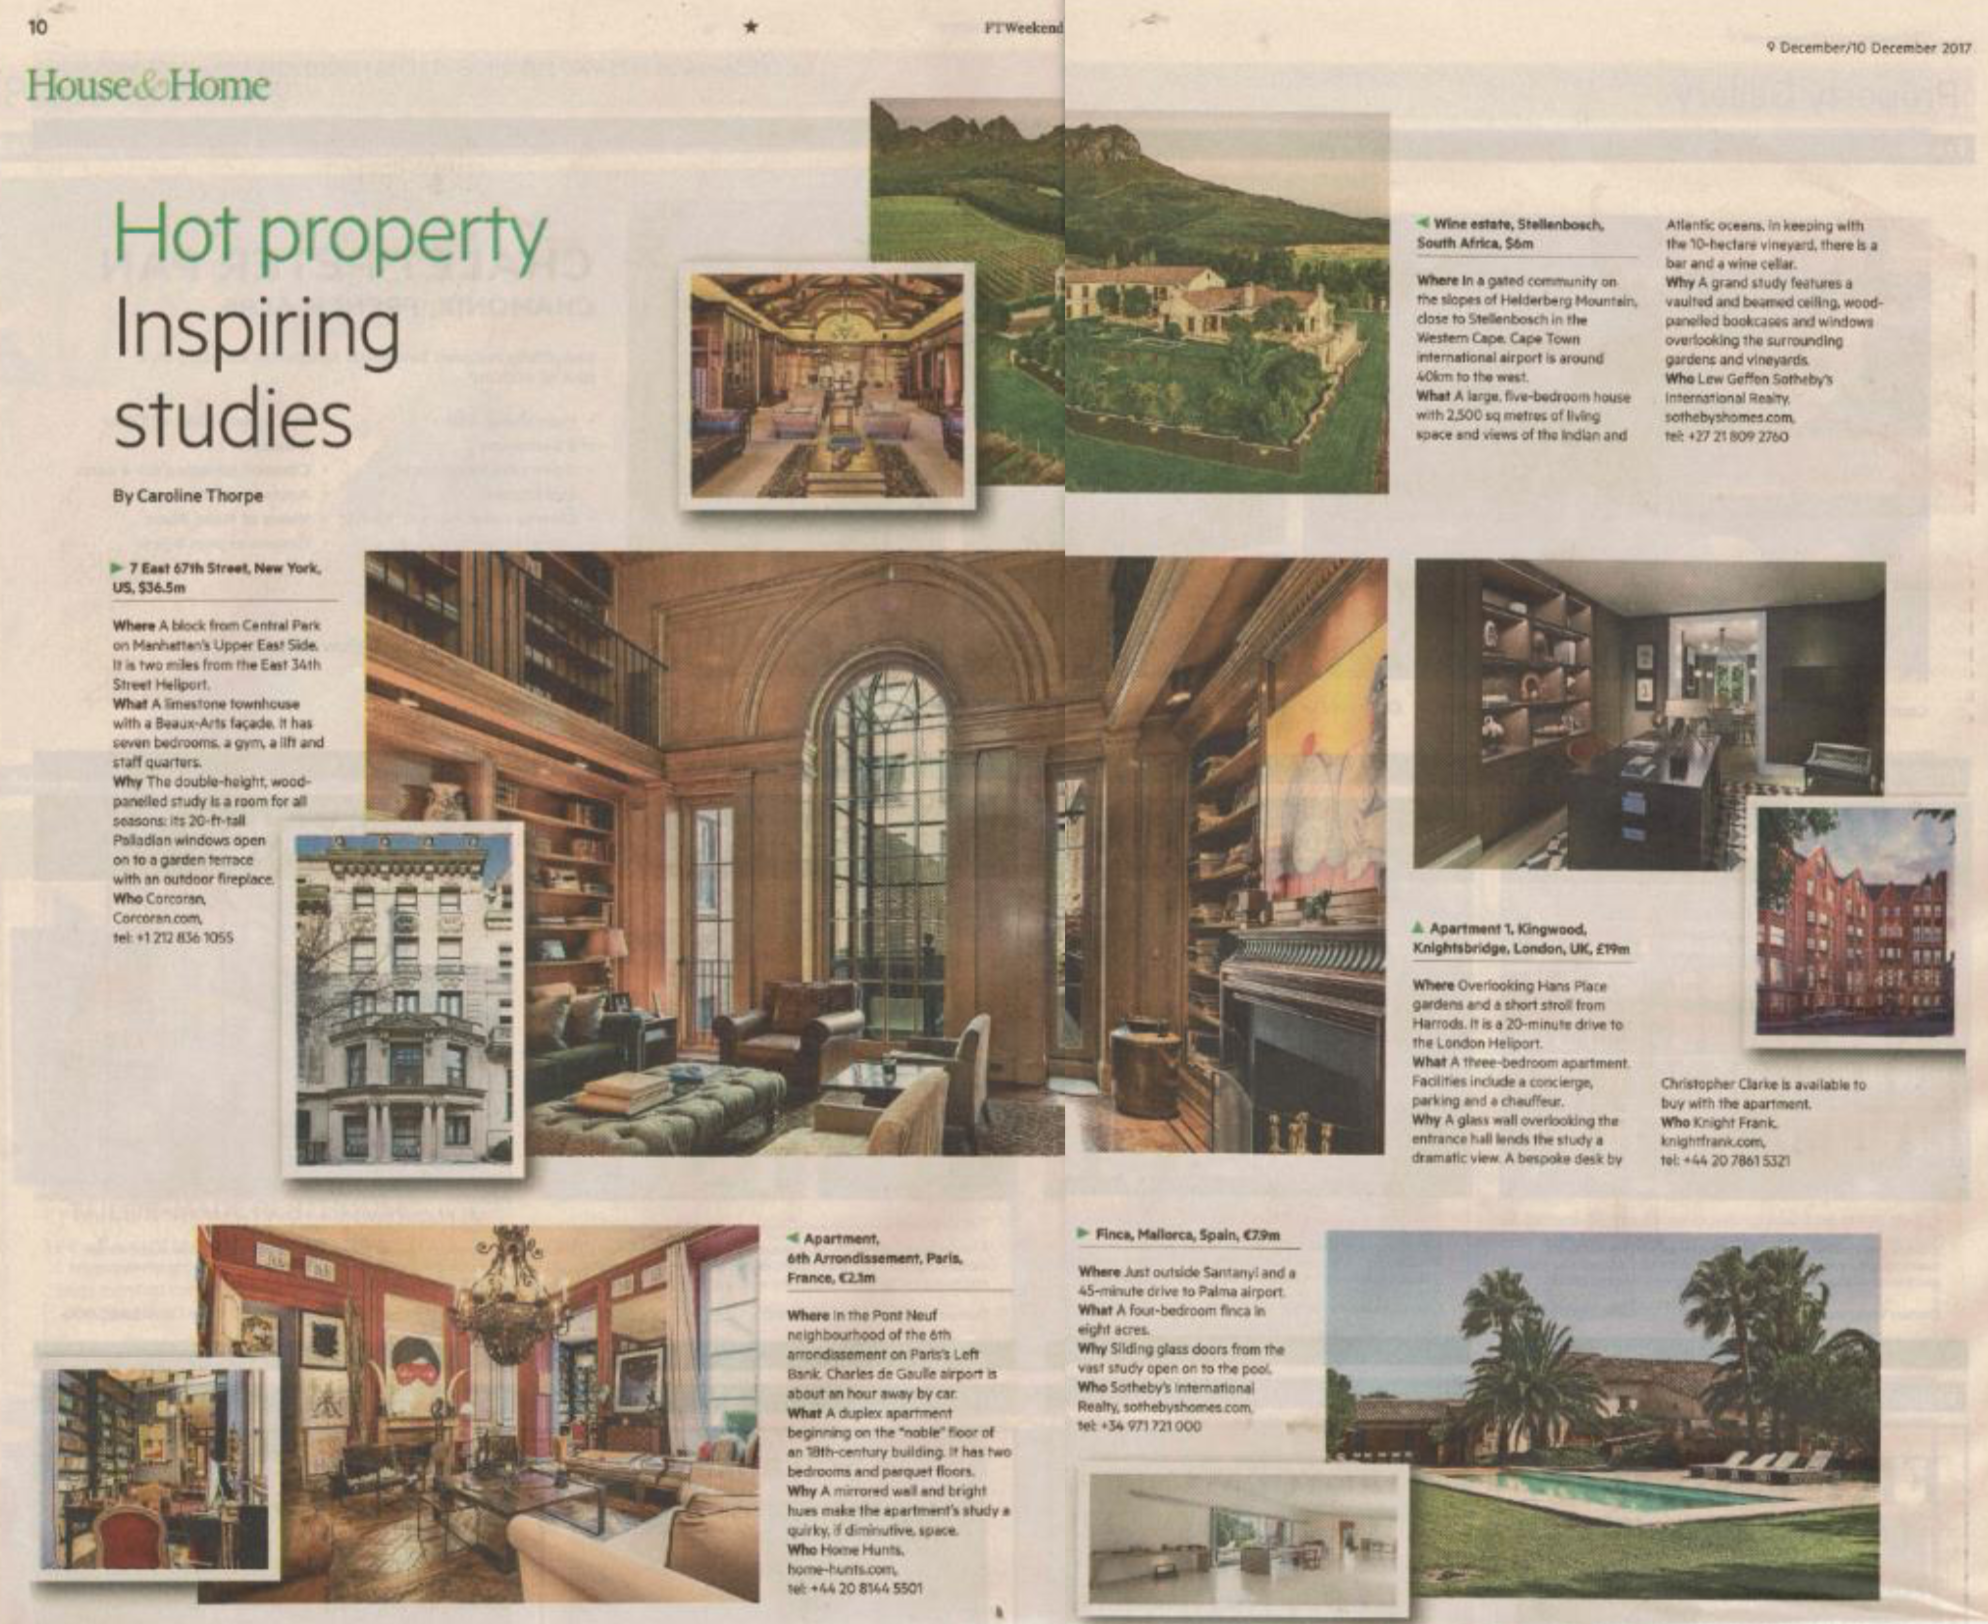 Financial Times – Homes with inspiring studies